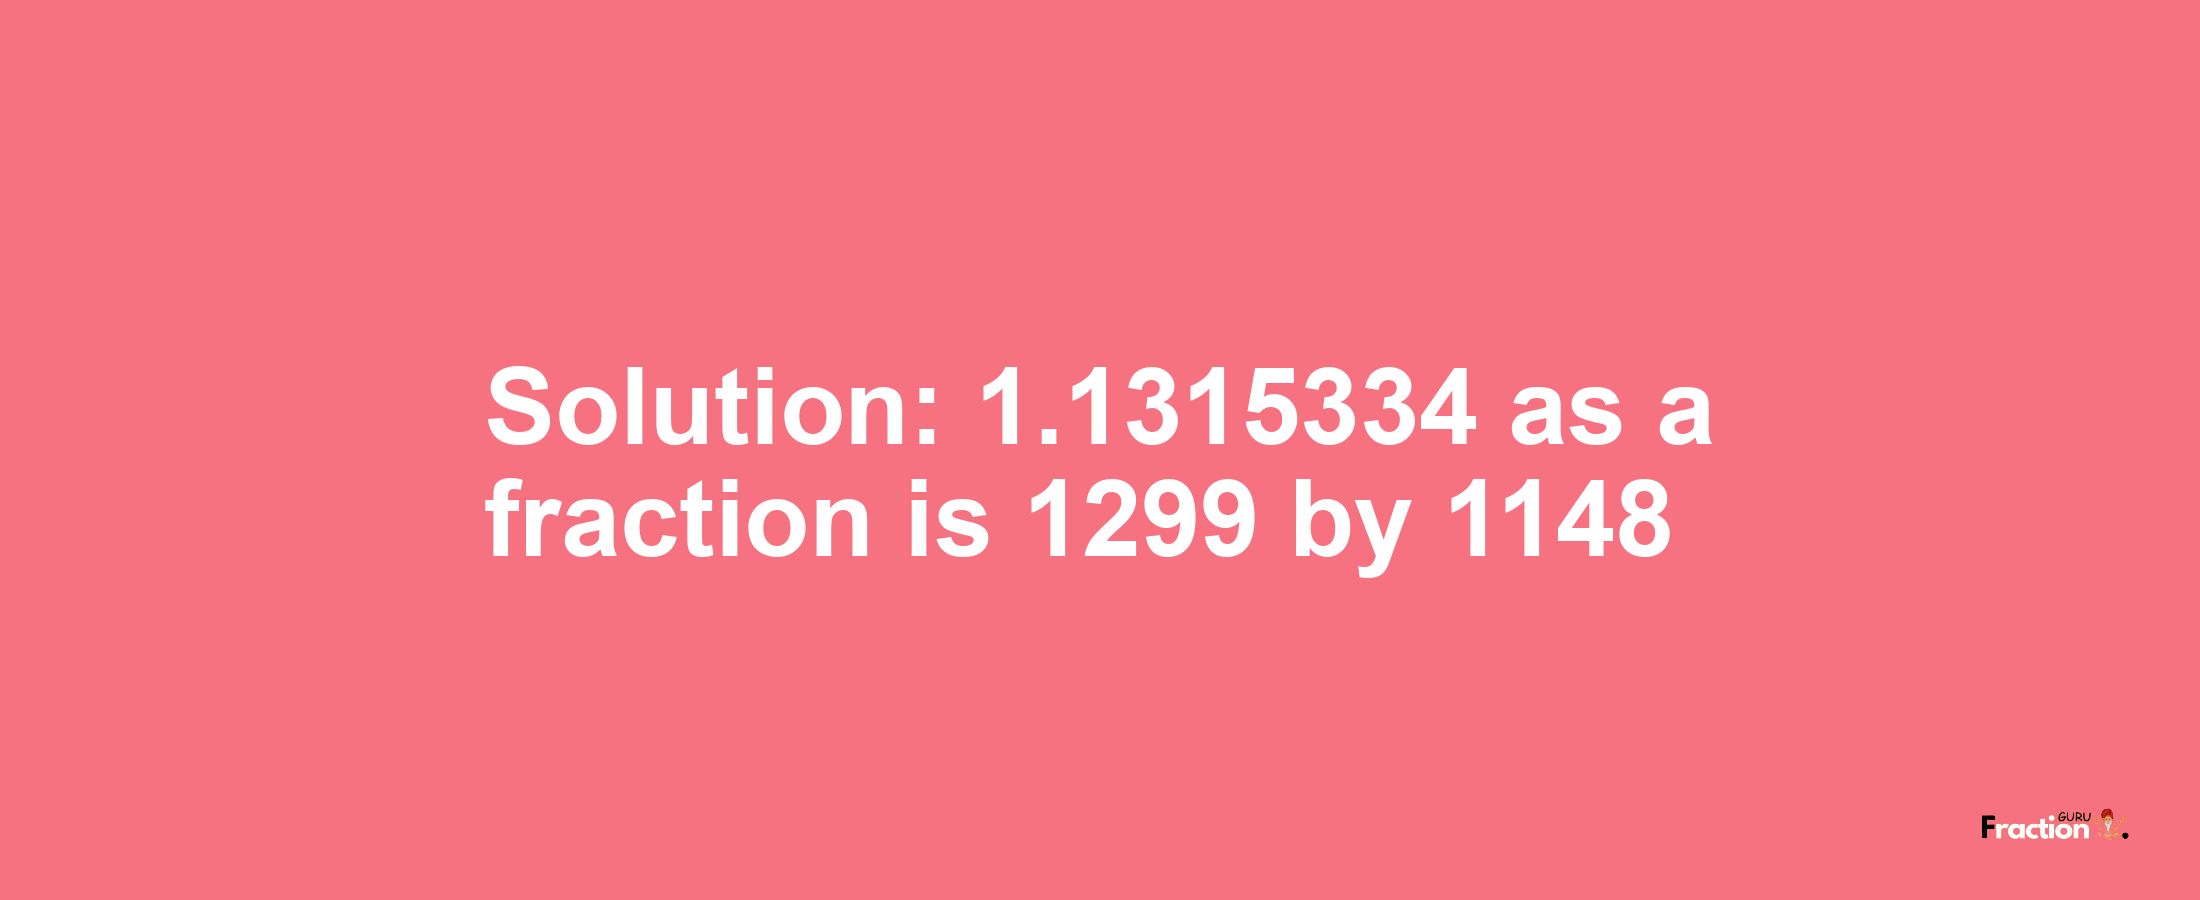 Solution:1.1315334 as a fraction is 1299/1148